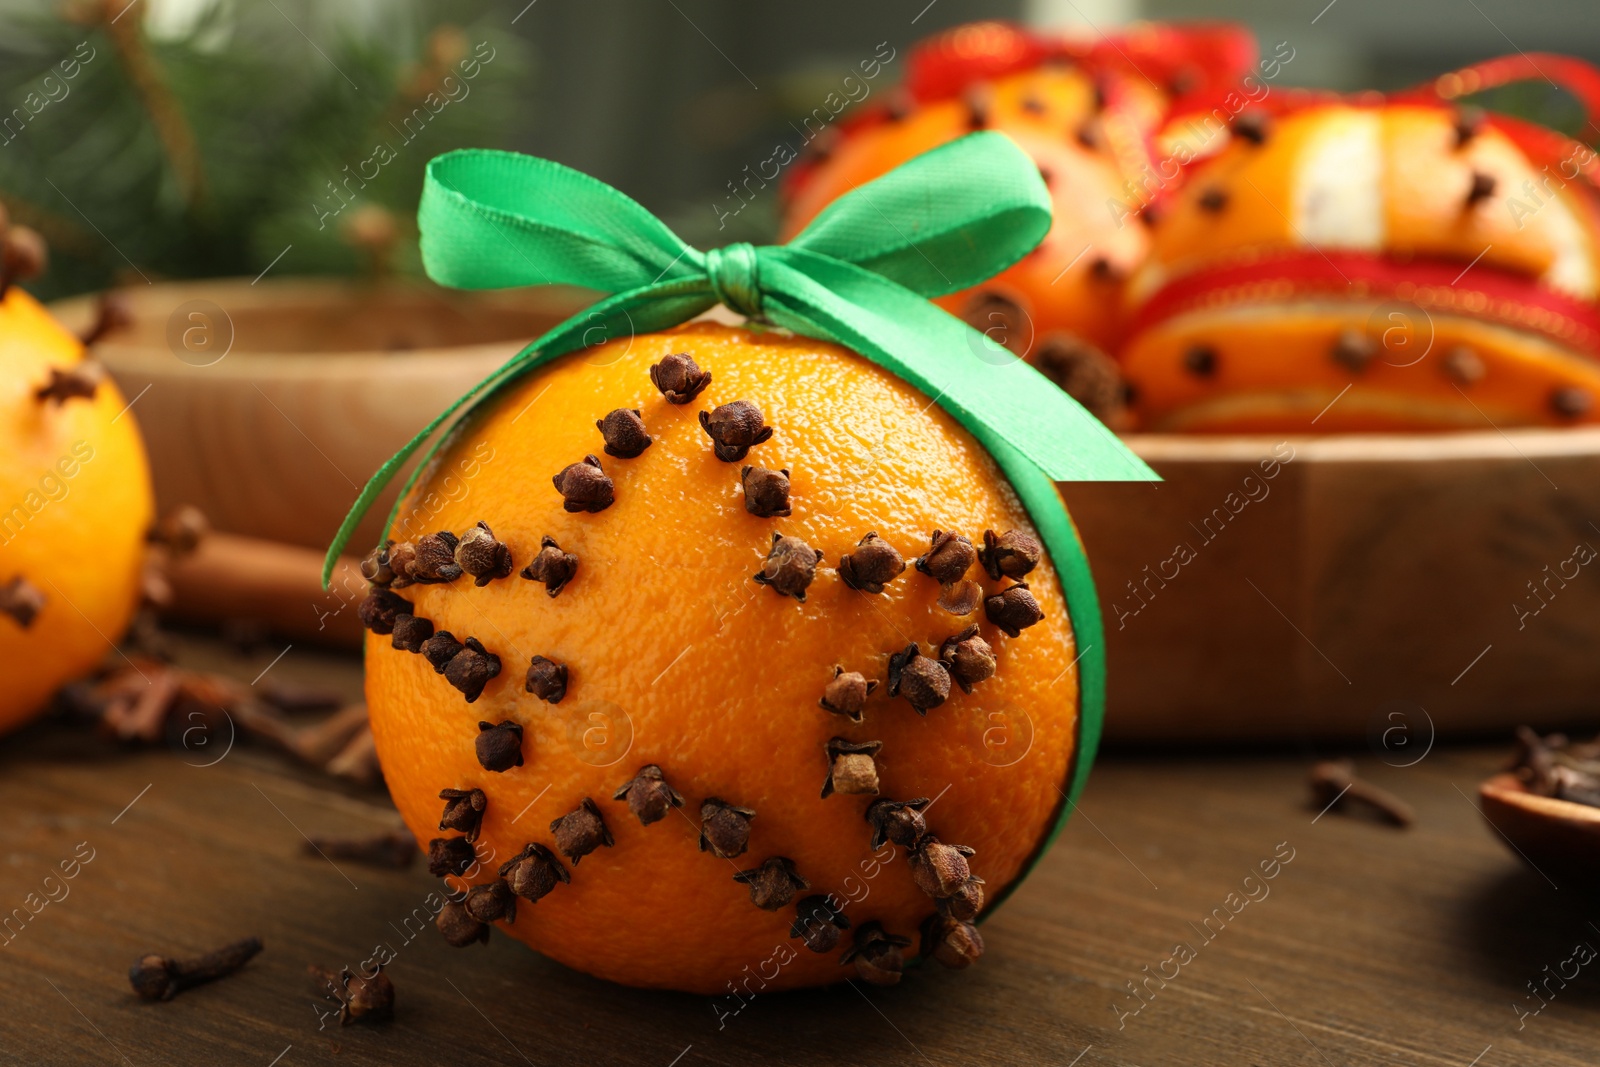 Photo of Pomander ball with green ribbon made of fresh tangerine and cloves on wooden table